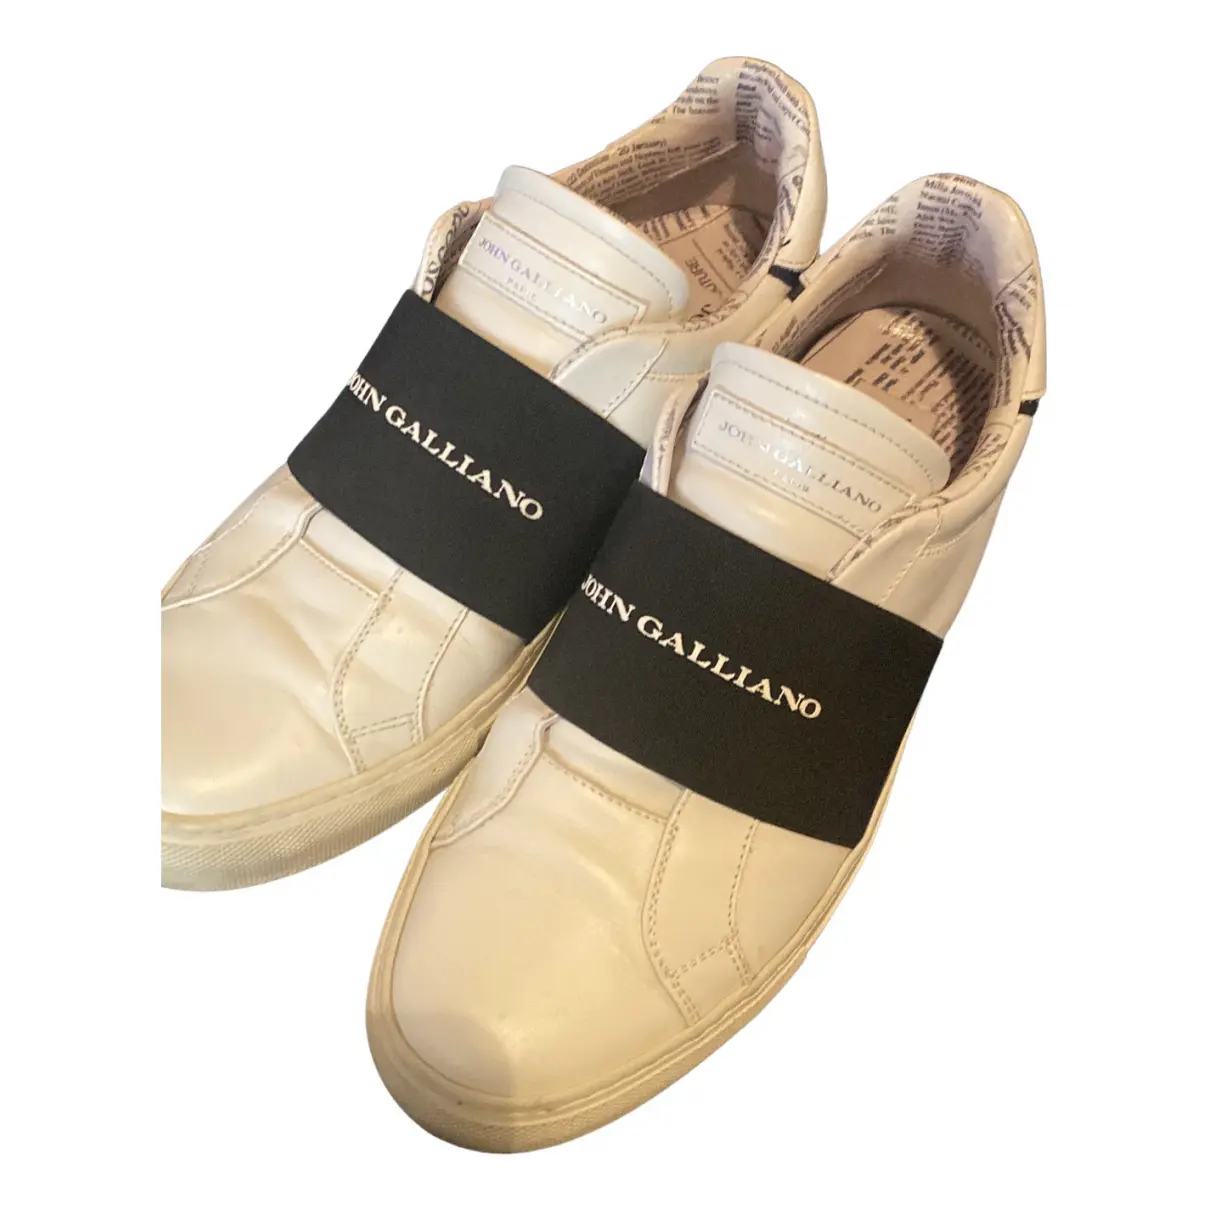 Buy John Galliano Leather trainers online - Vintage